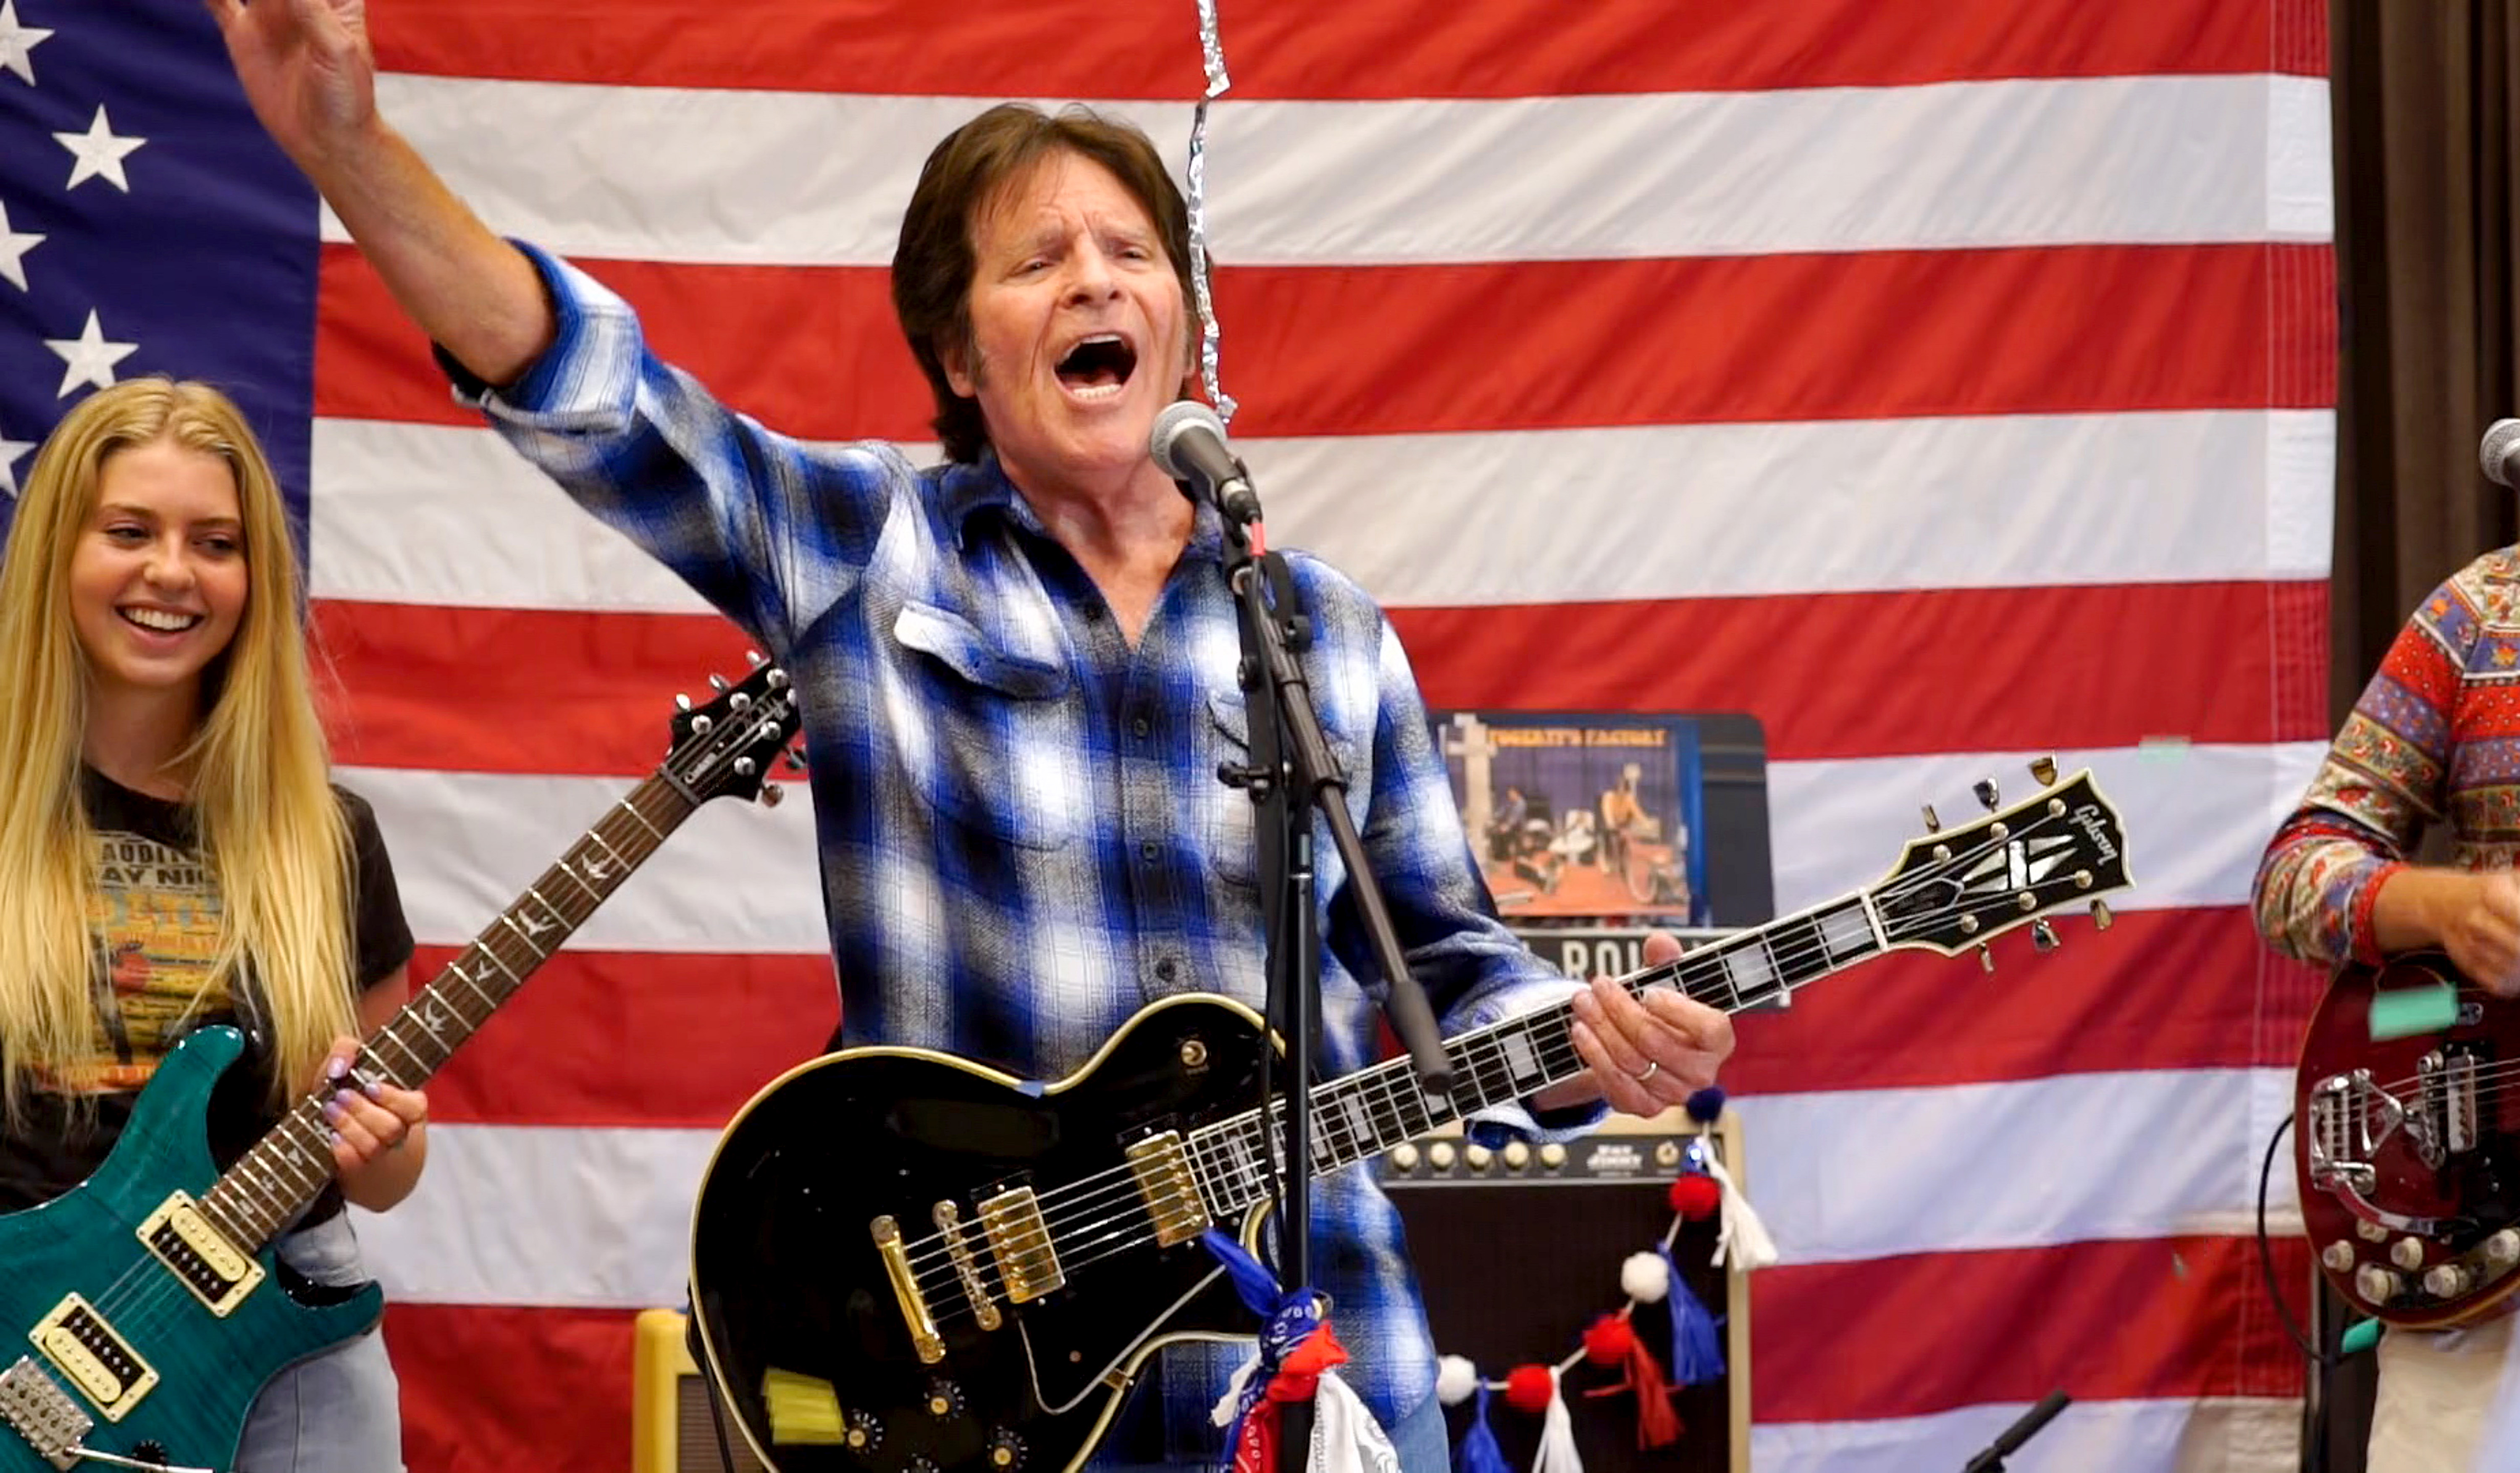 John Fogerty Rips Trump for Playing 'Fortunate Son' Before Michigan Rally: 'Confounding'